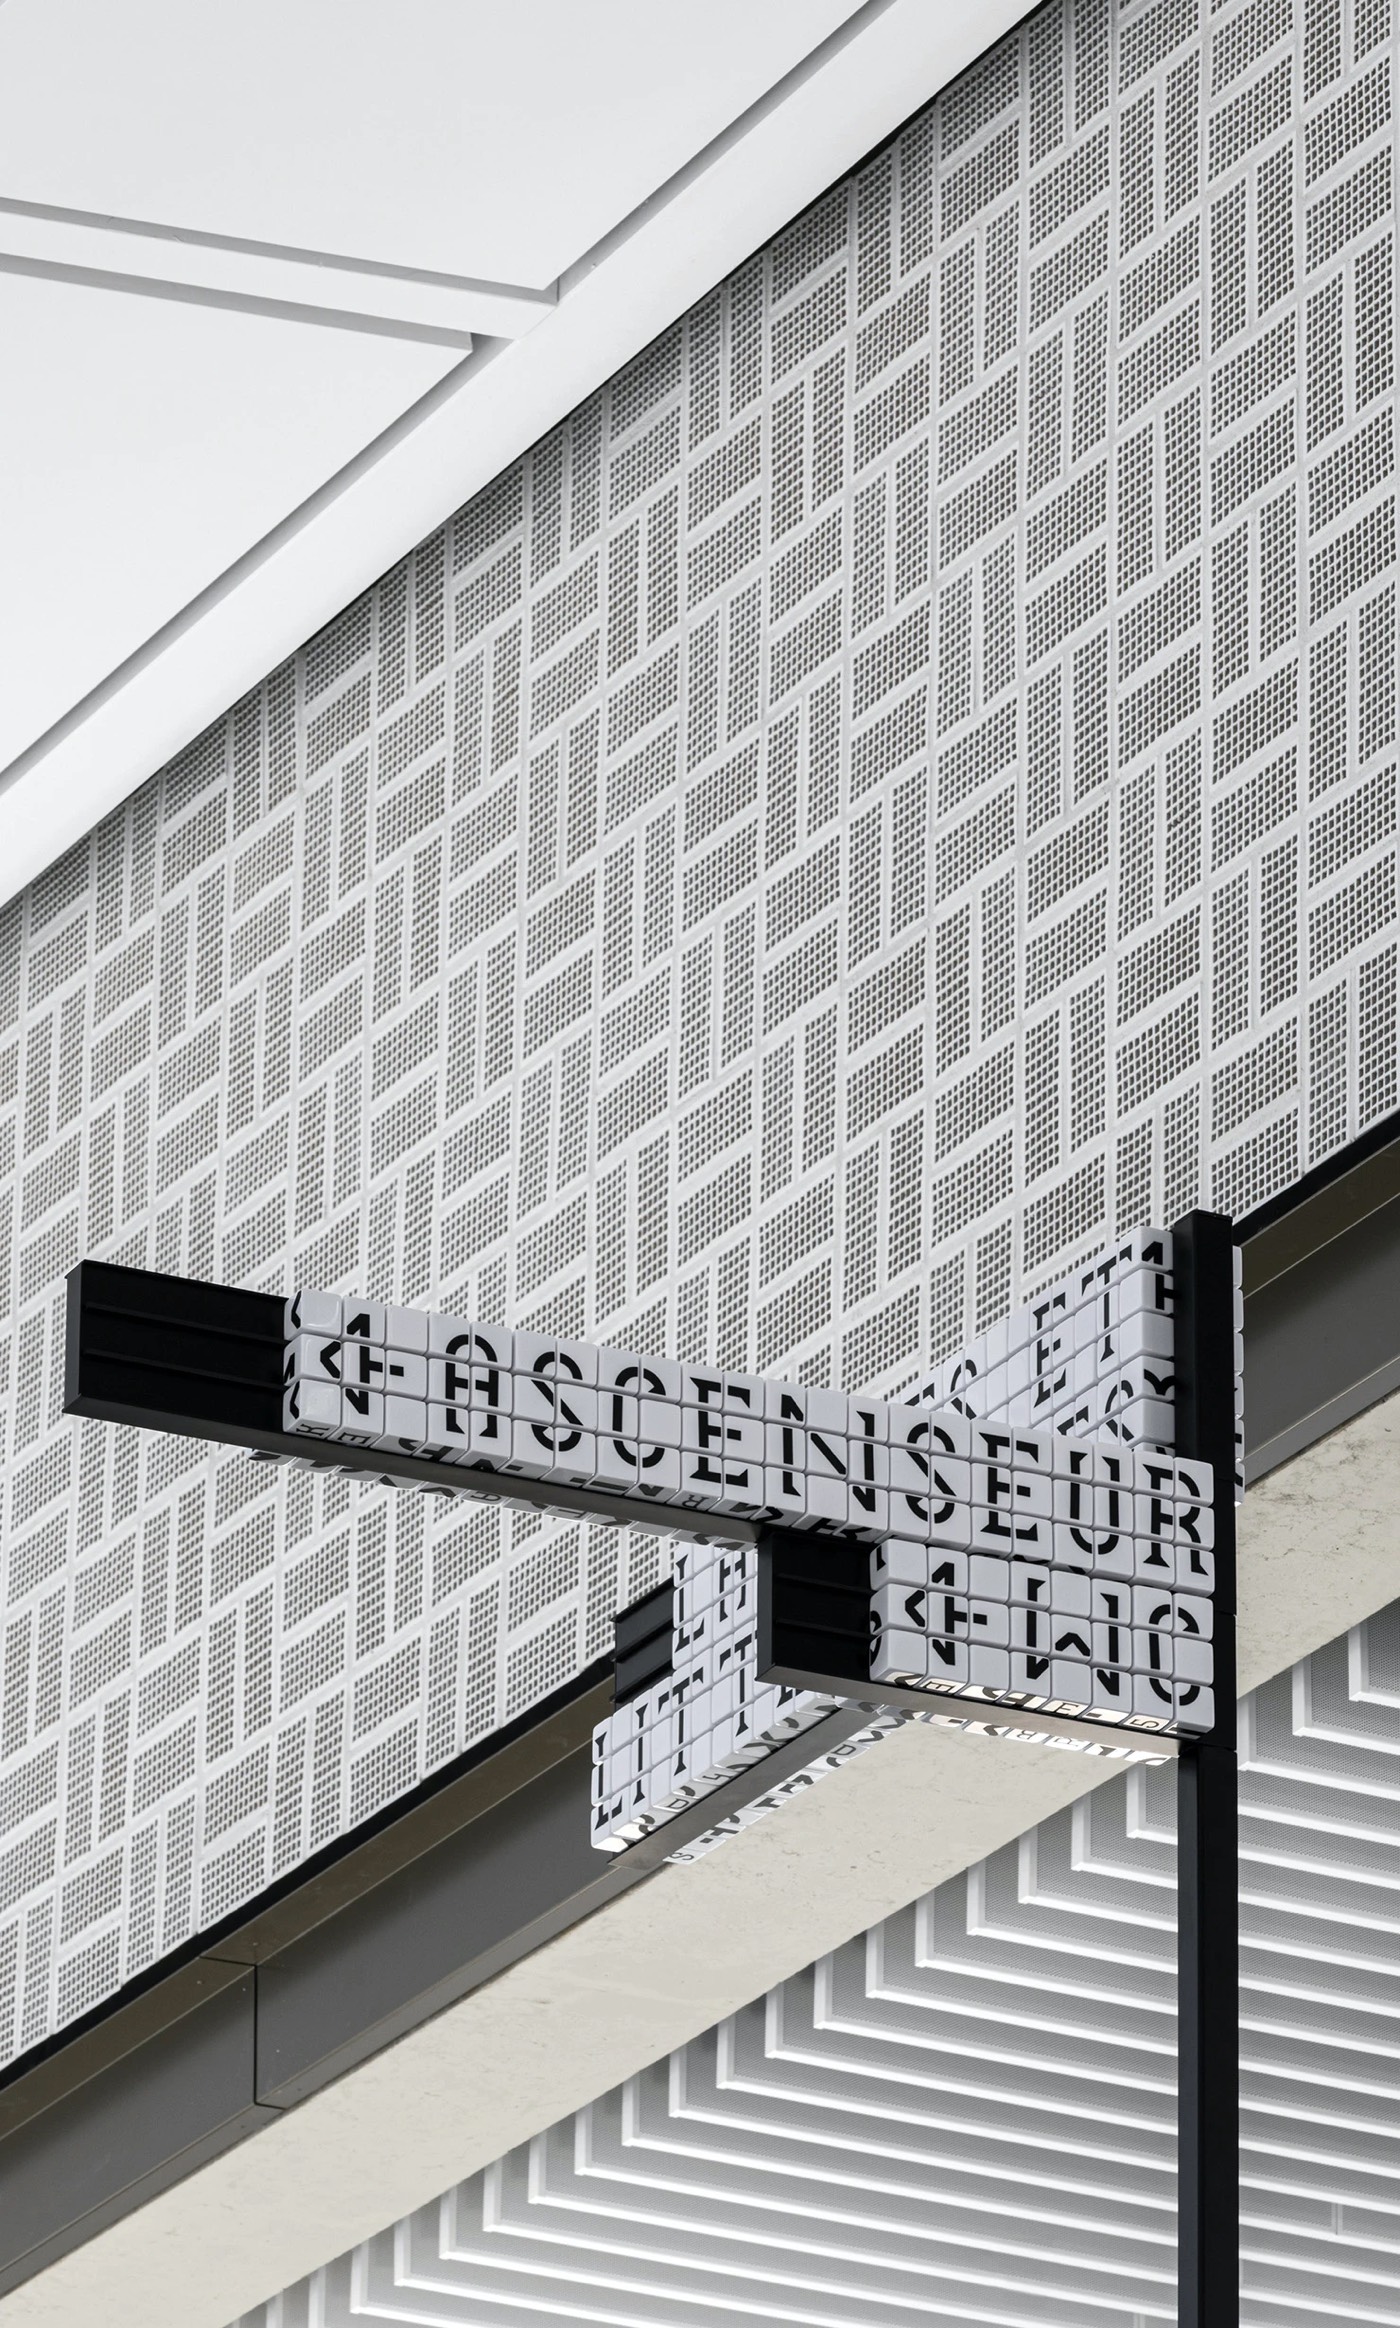 Modular Signage for the National Library of Luxembourg<br />
